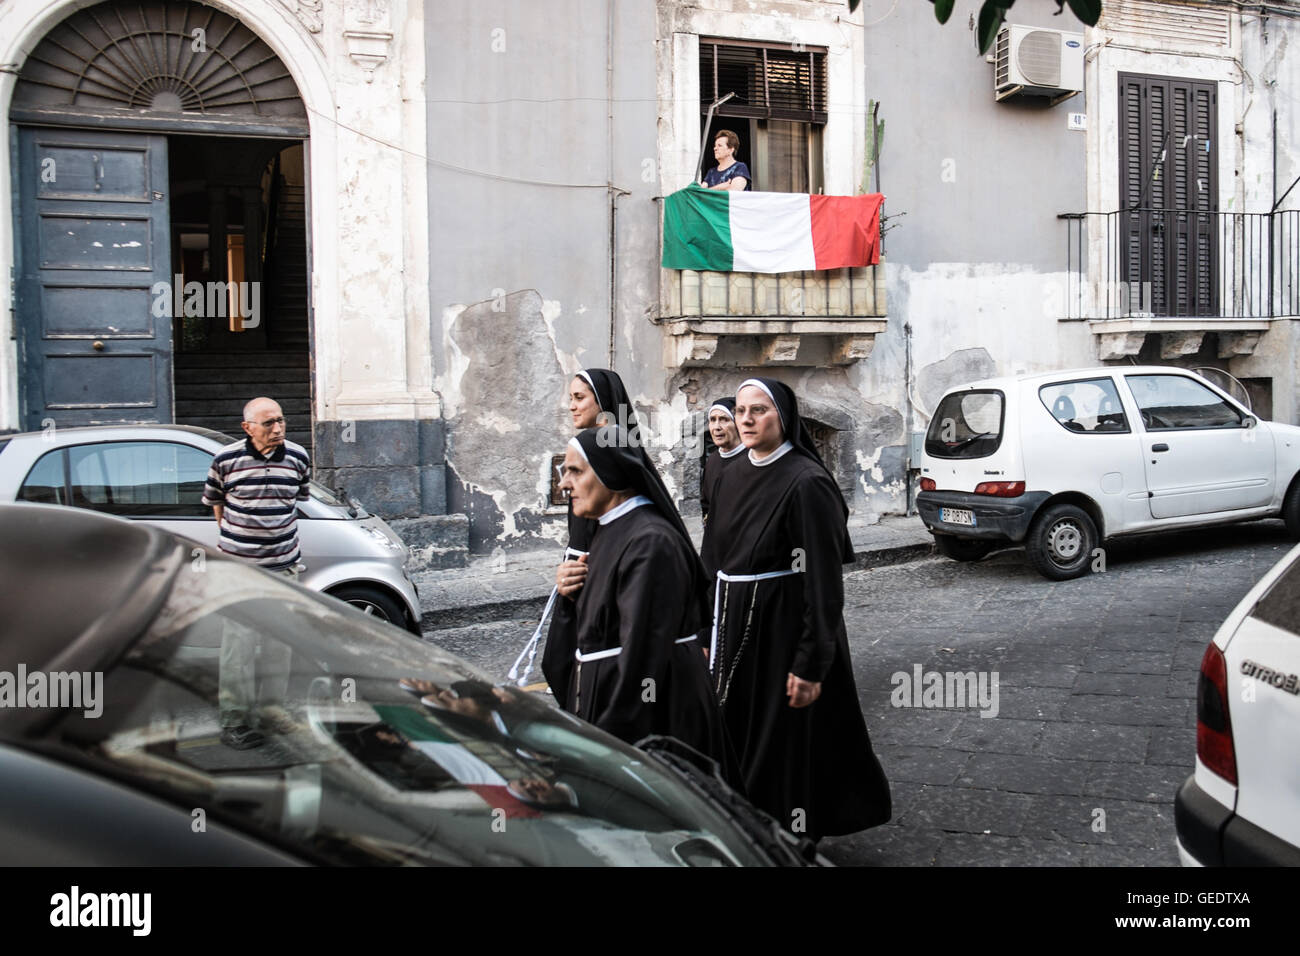 A man observe four nuns walking on a street of Catania, Sicily, while a woman stand on his balcony covered with an Italian flag. Stock Photo